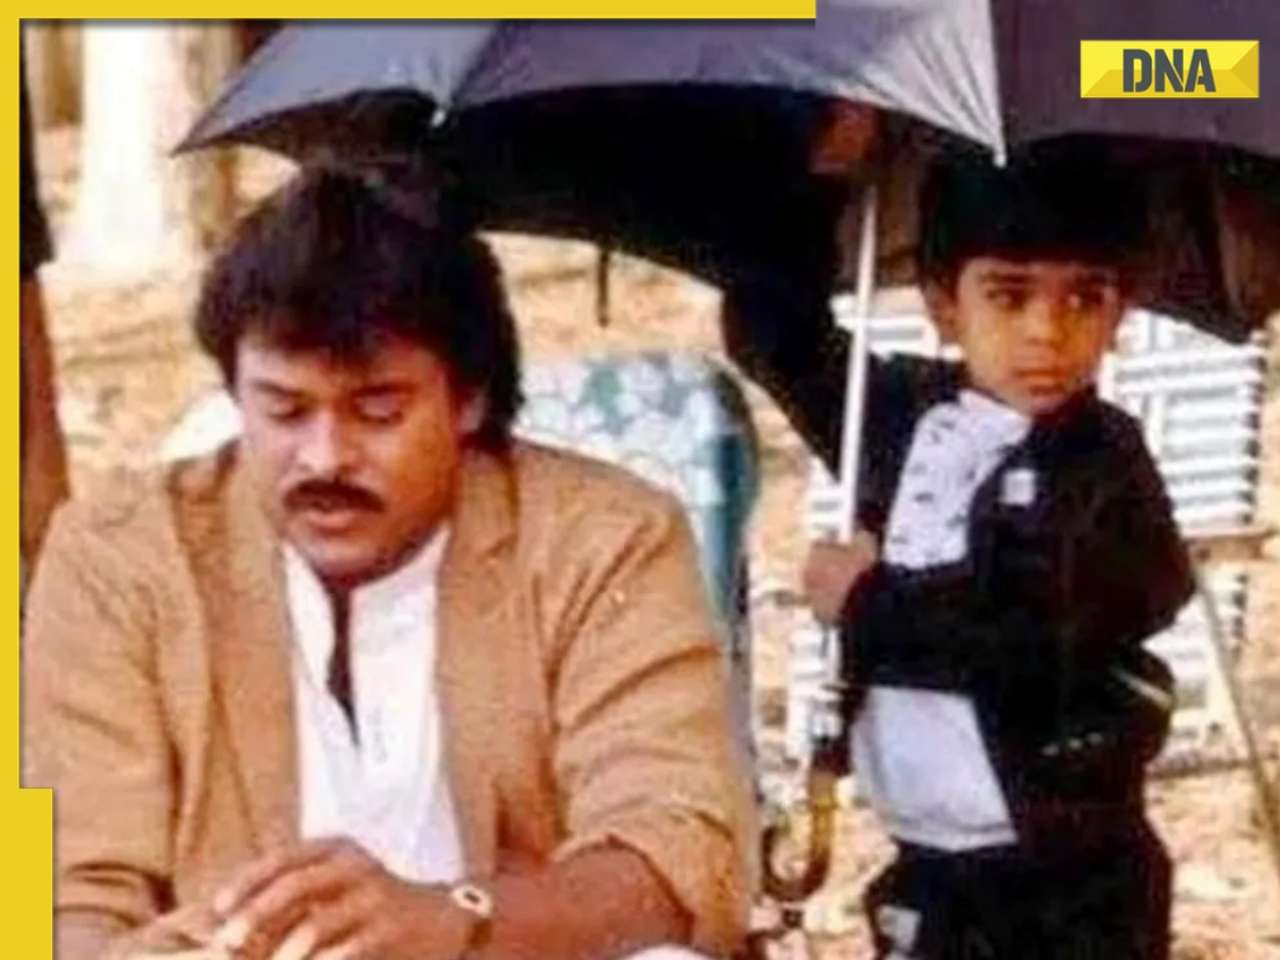 This child standing with superstar Chiranjeevi has net worth of over Rs 1300 crores, is now taking Rs 100 crore for..